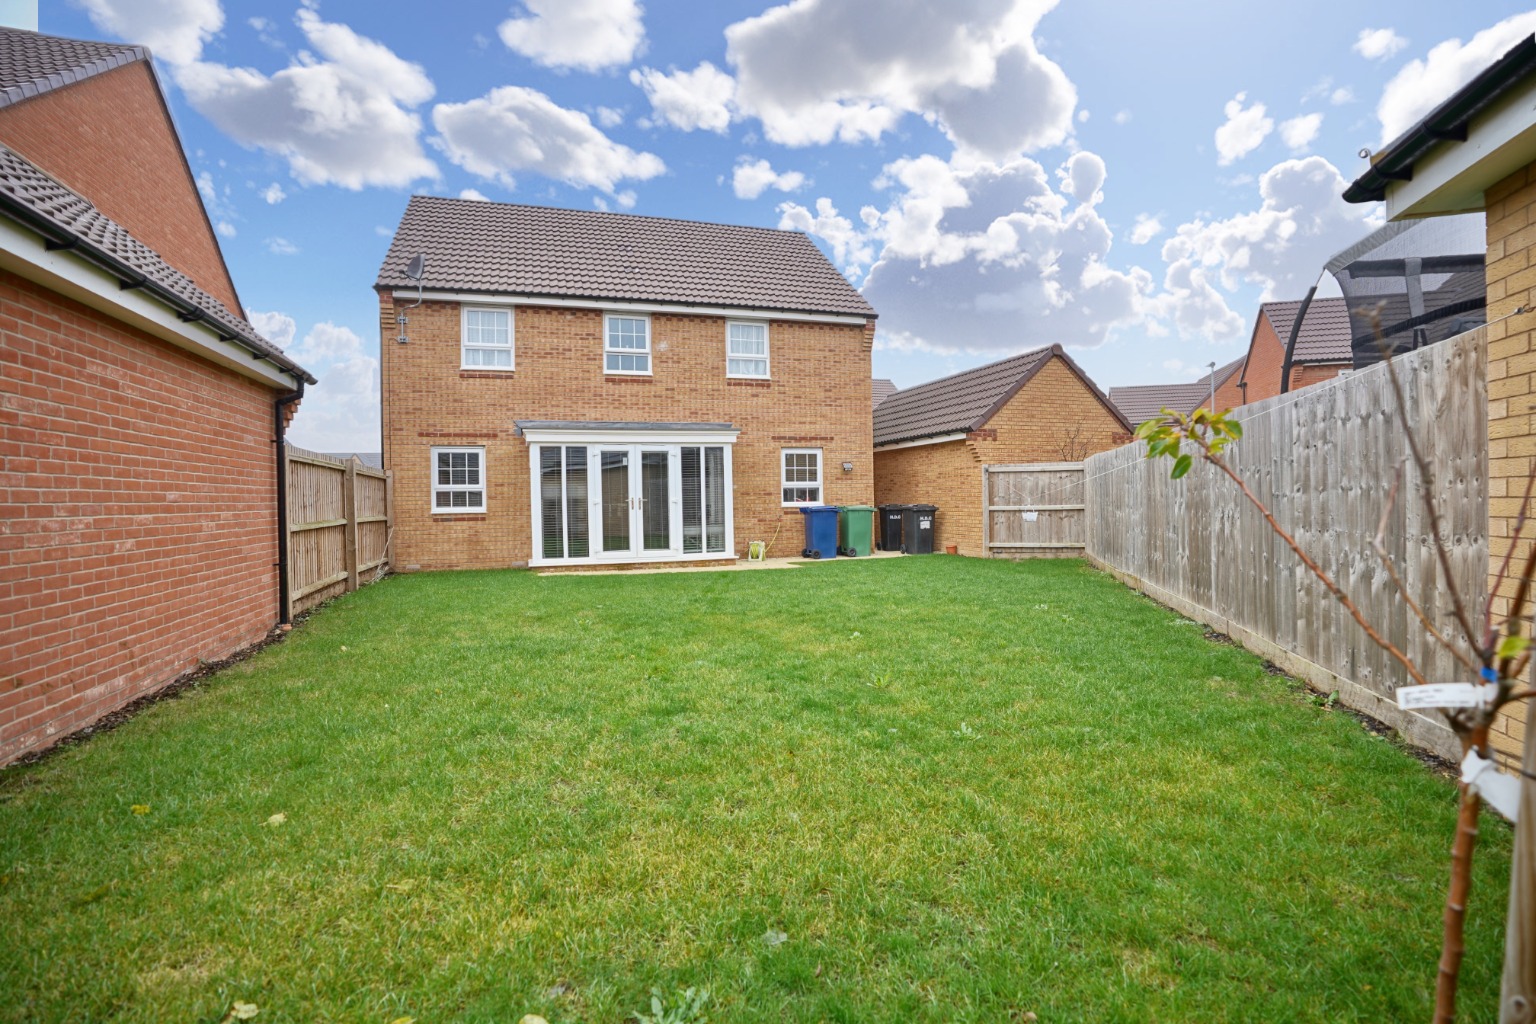 4 bed detached house for sale in Saxon Way, Huntingdon - Property Image 1